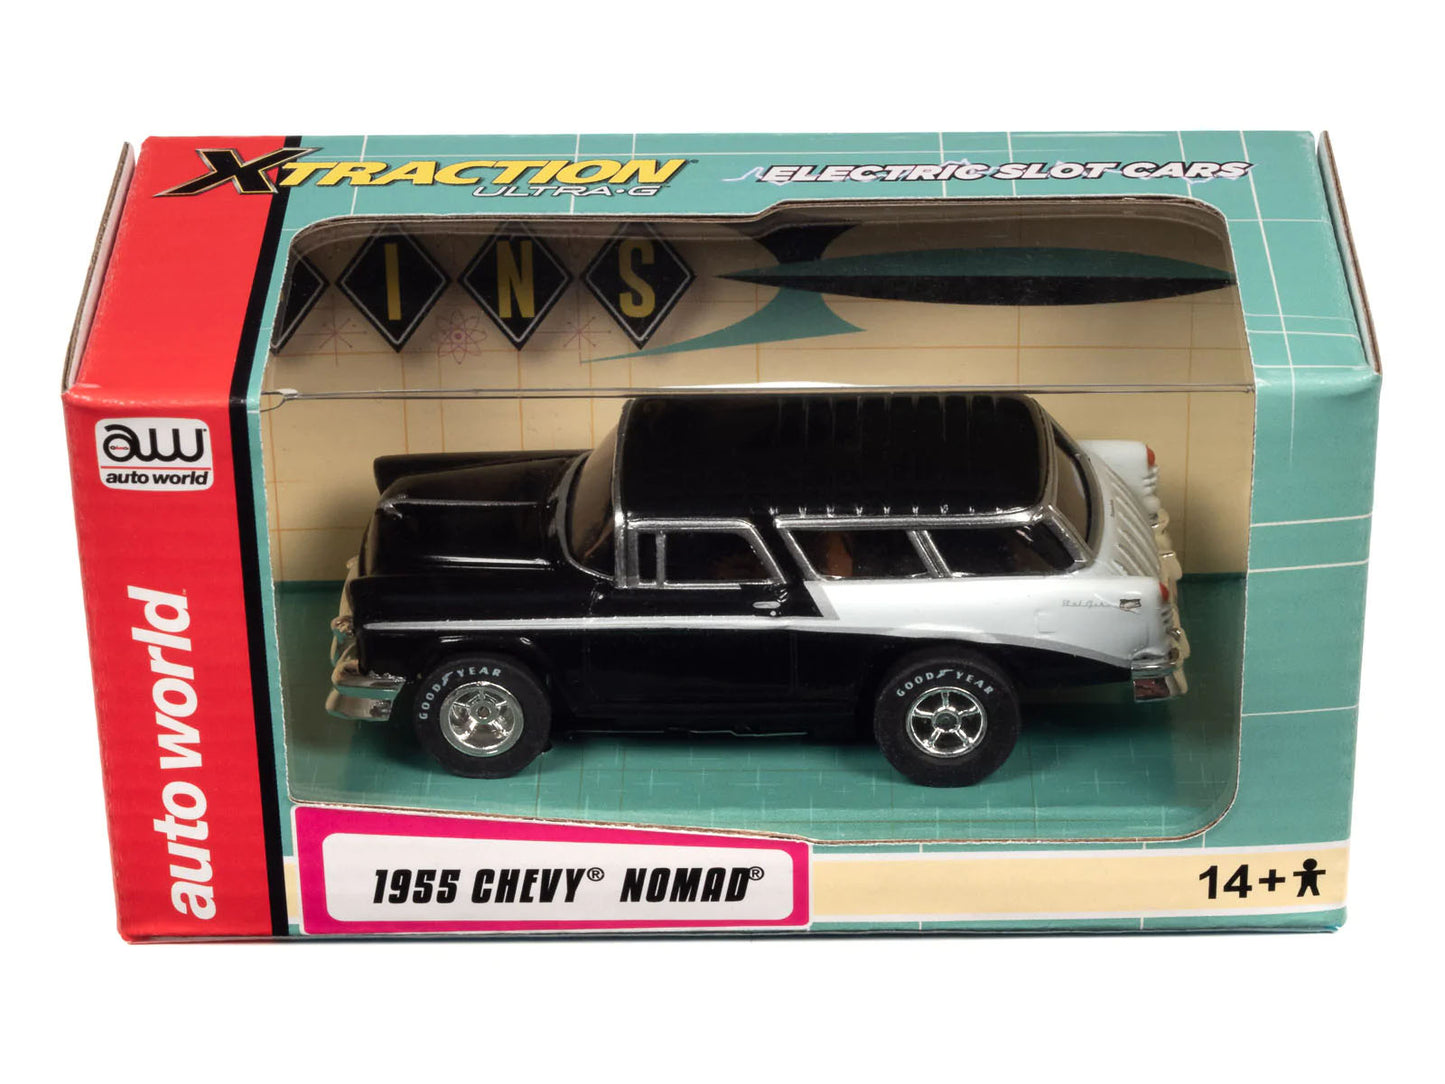 Auto World 1955 Chevy Nomad Bel Air 55' Exclusive HO slot car Limited Edition - PowerHobby